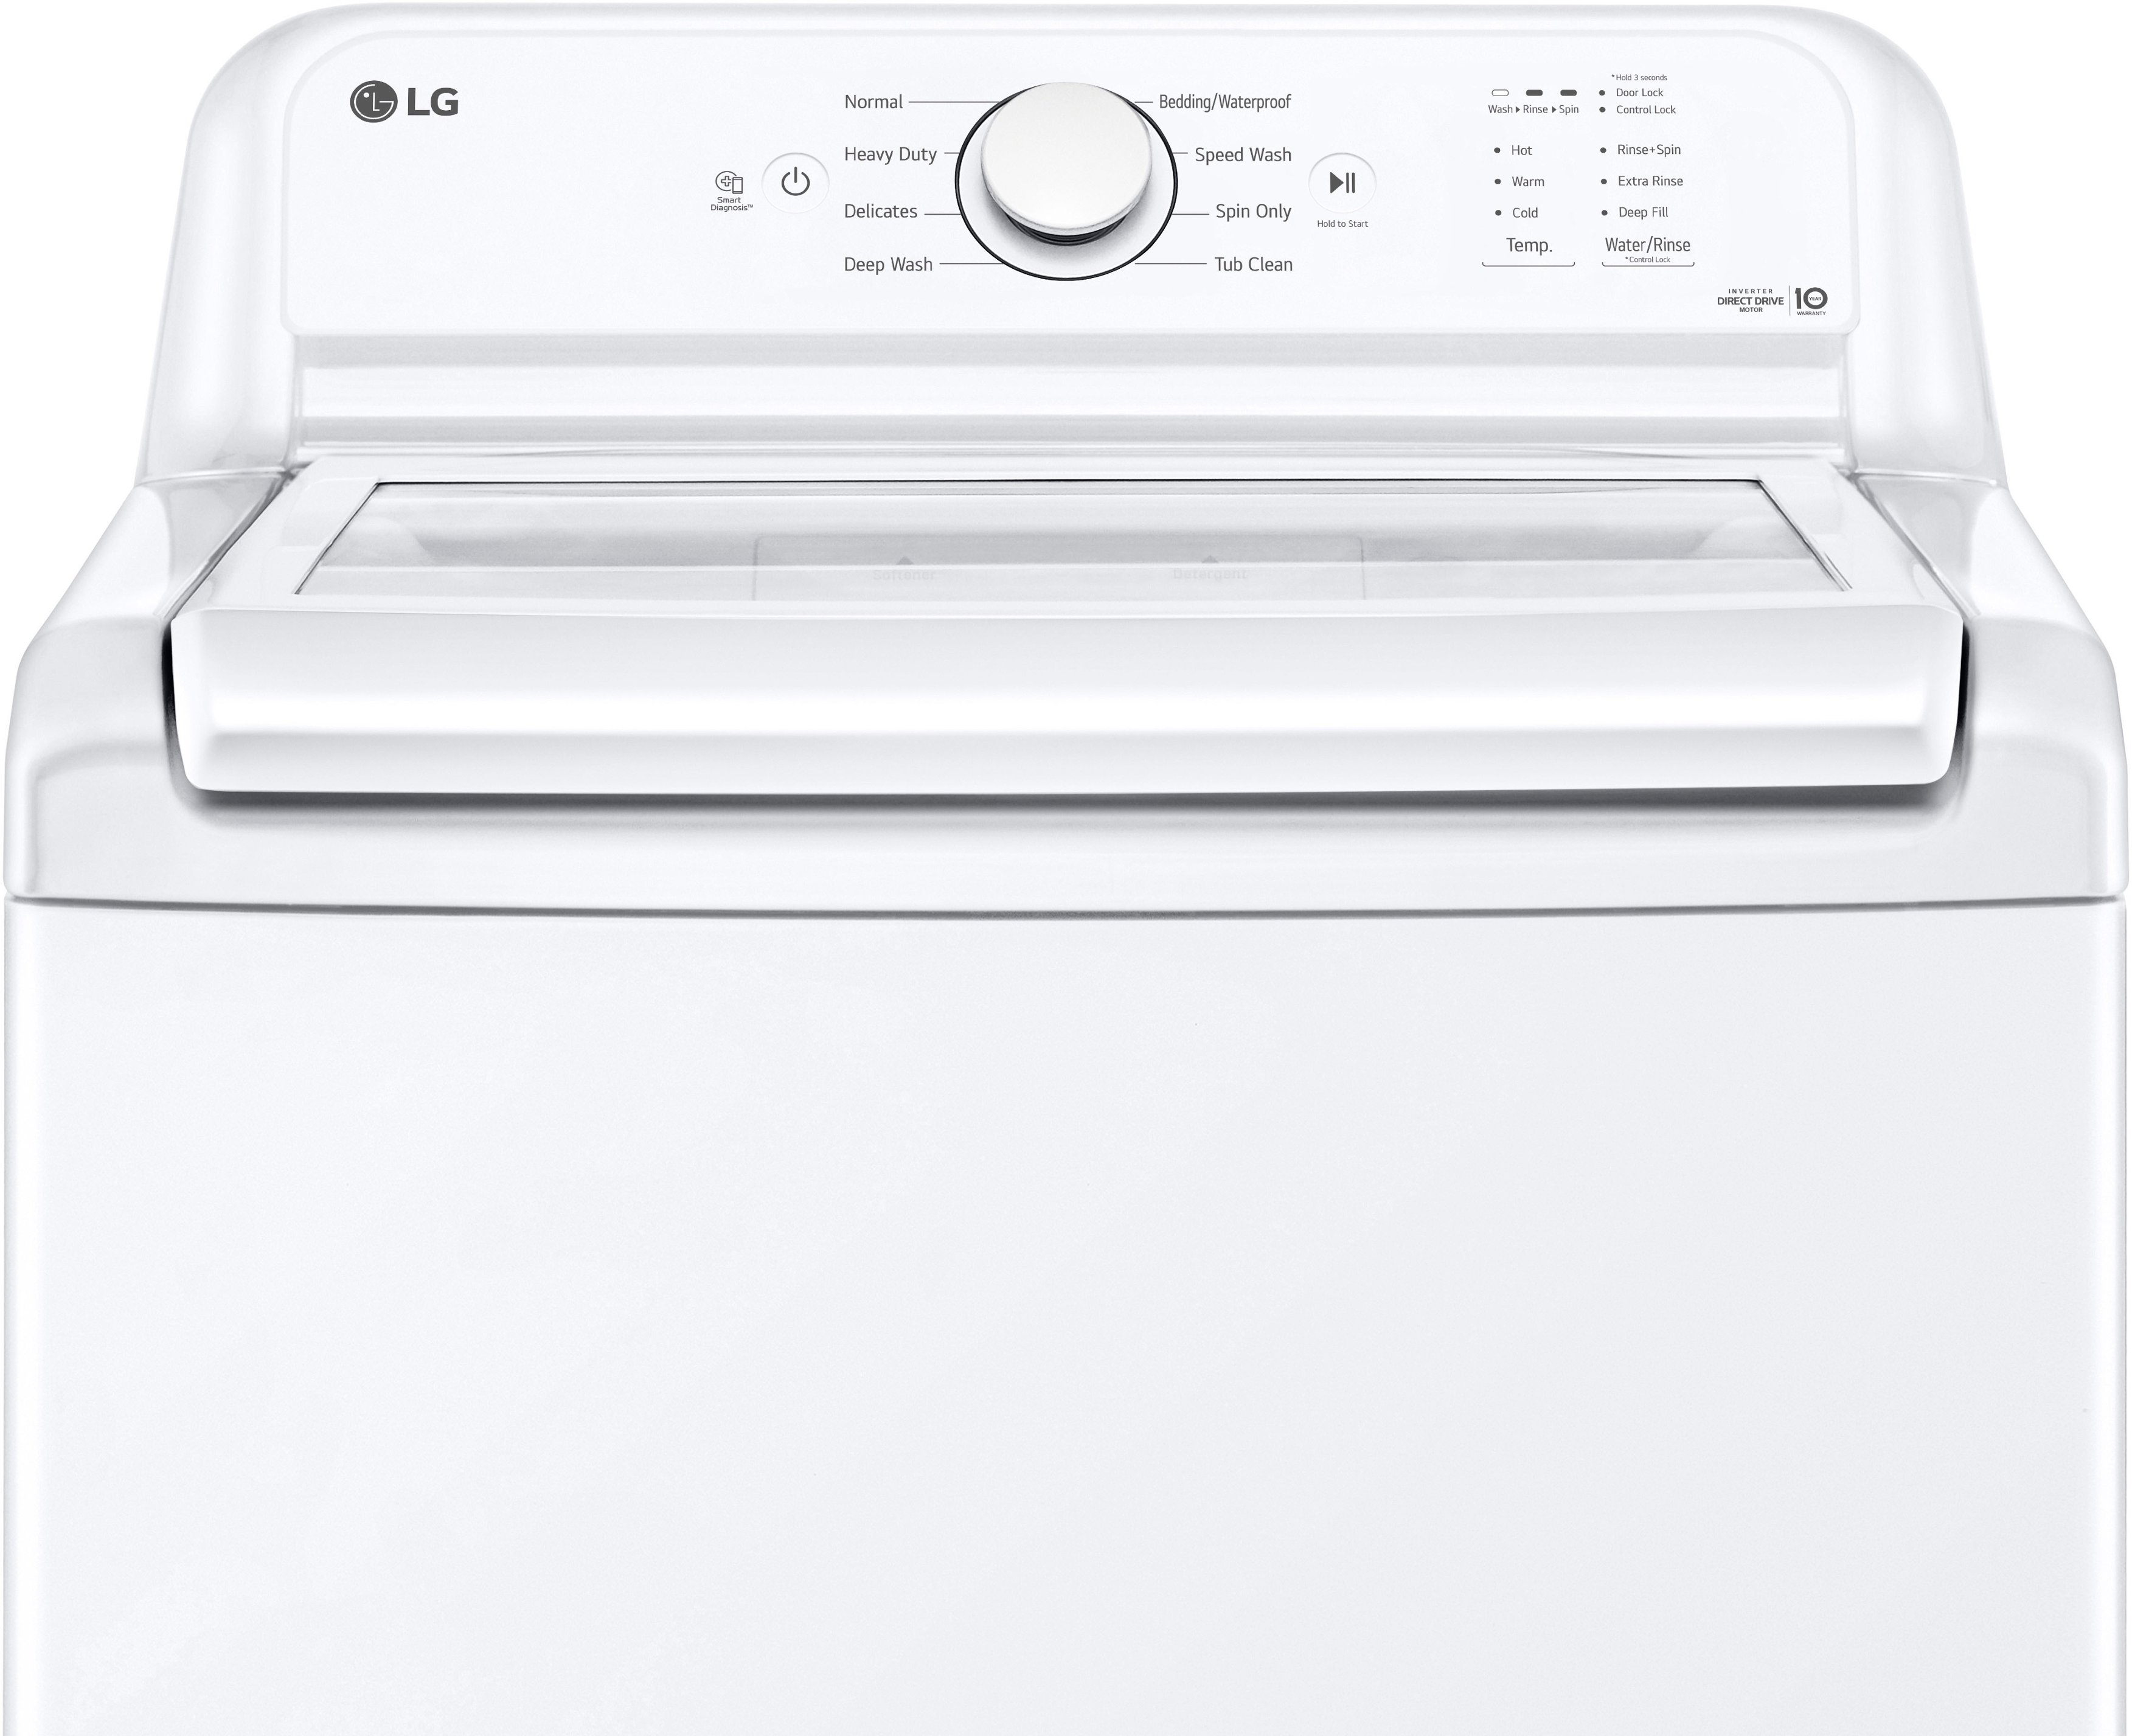 LG 4.1 Cu. Ft. Top Load Washer with SlamProof Glass Lid White WT6105CW -  Best Buy